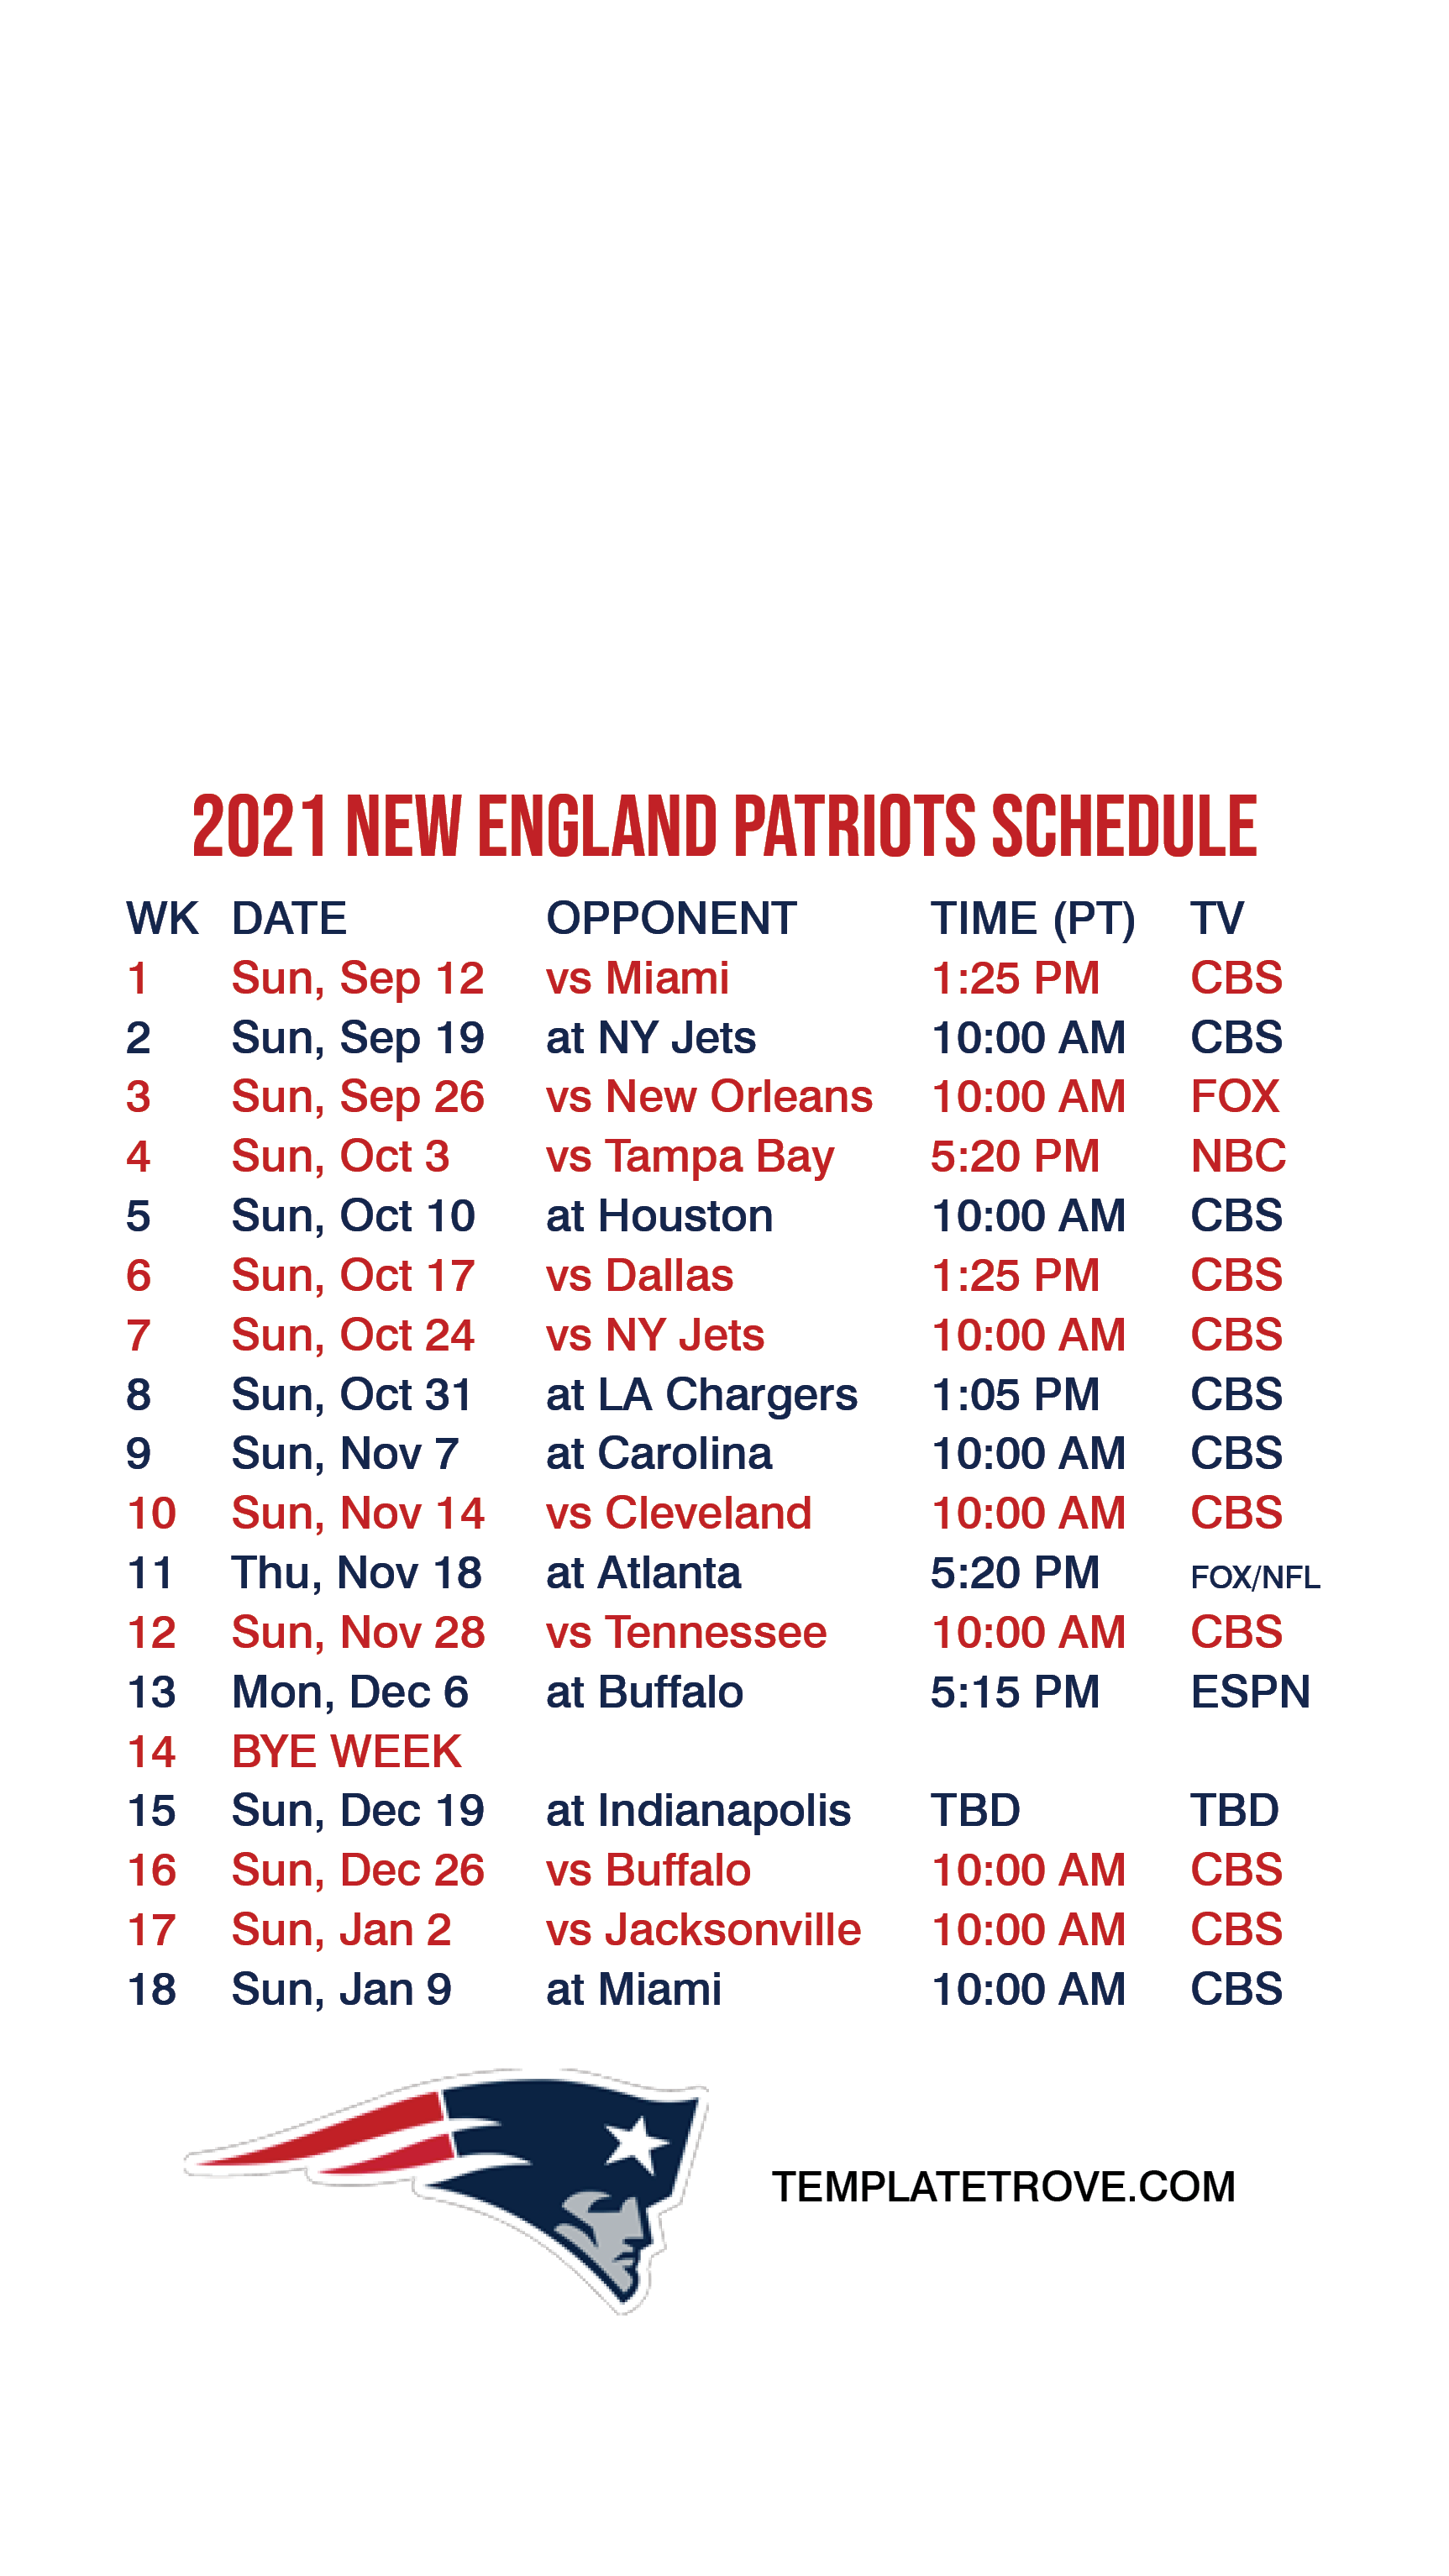 N E Patriots Schedule 2022 2021-2022 New England Patriots Lock Screen Schedule For Iphone 6-7-8 Plus